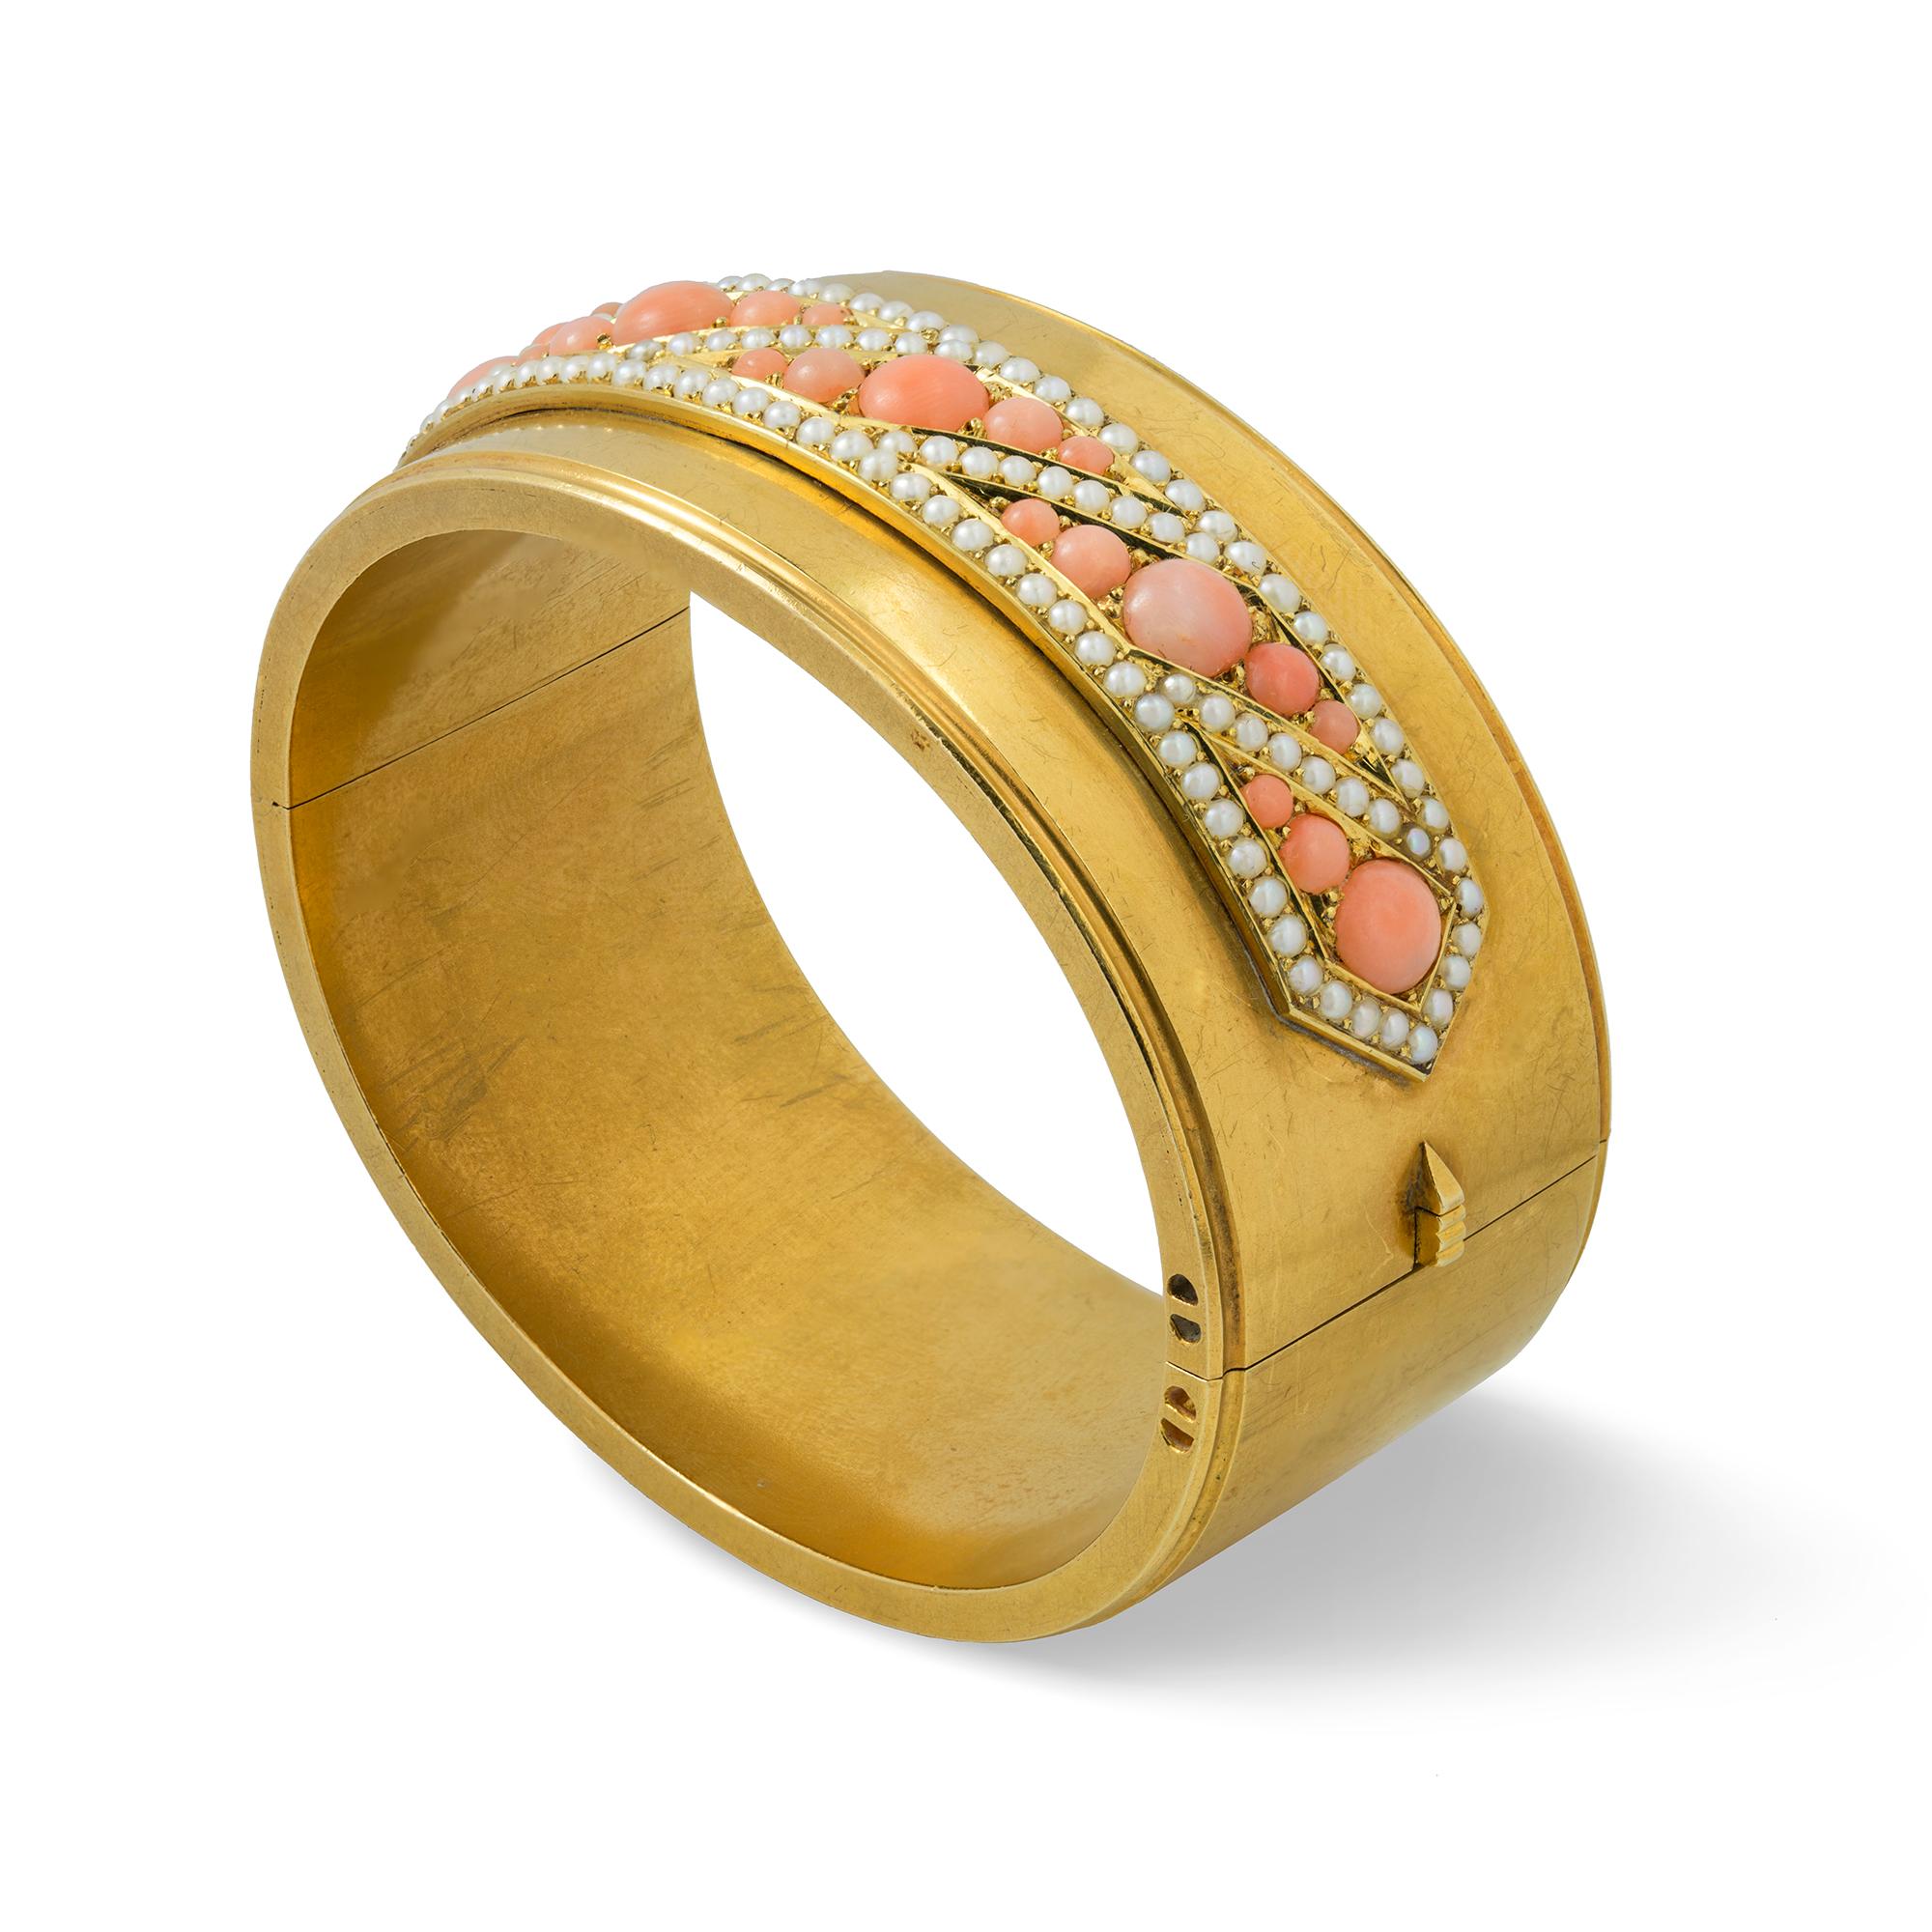 A Victorian coral and pearl gold bangle, the front side with a hexagonal panel set with cabochon-cut pink corals, surrounded by seed-pearl frame all set in a geometrical pattern, with a plain yellow gold back with hidden clasp, circa 1880, unmarked,